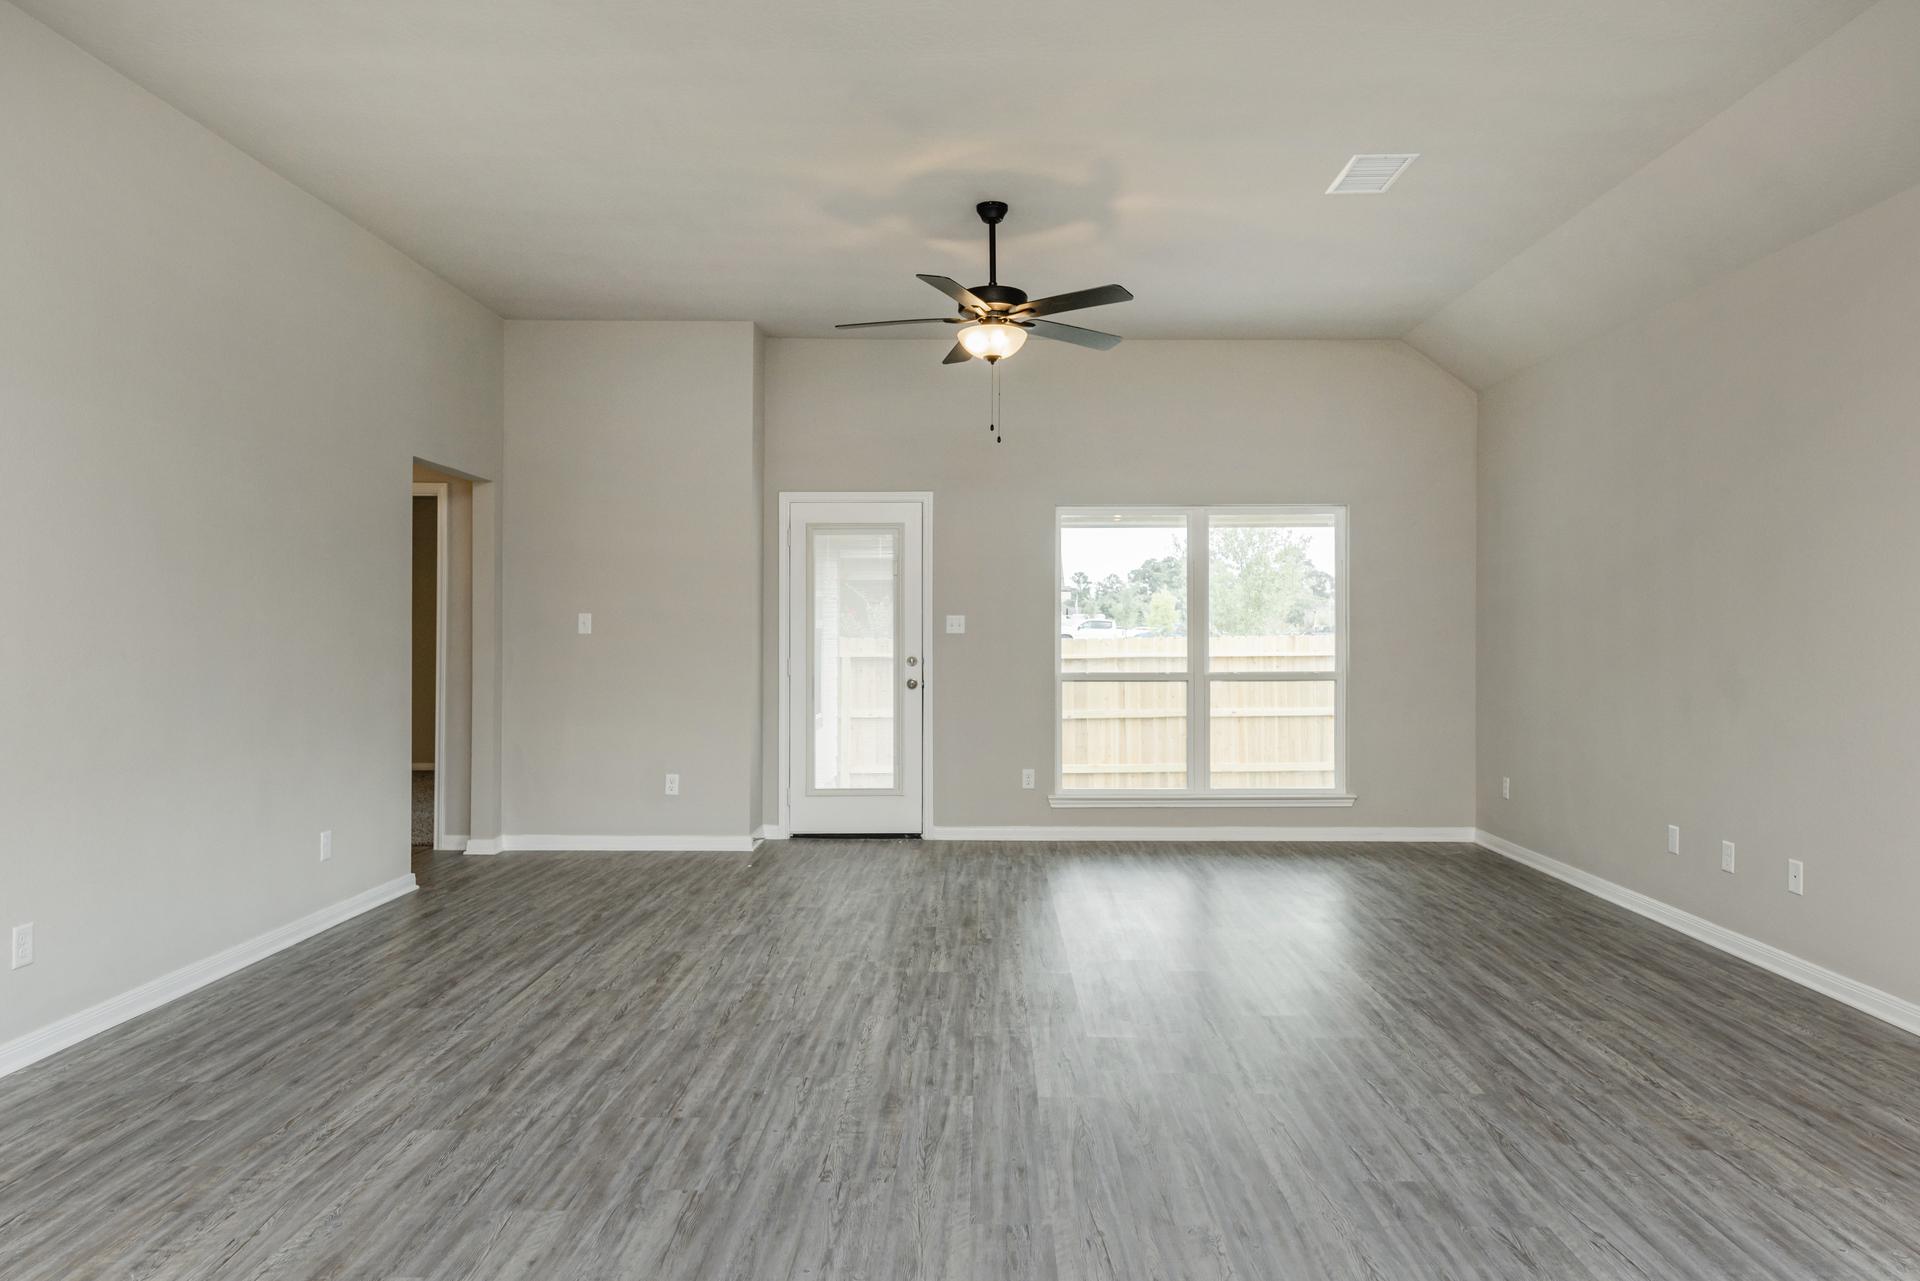 3br New Home in Texas City, TX